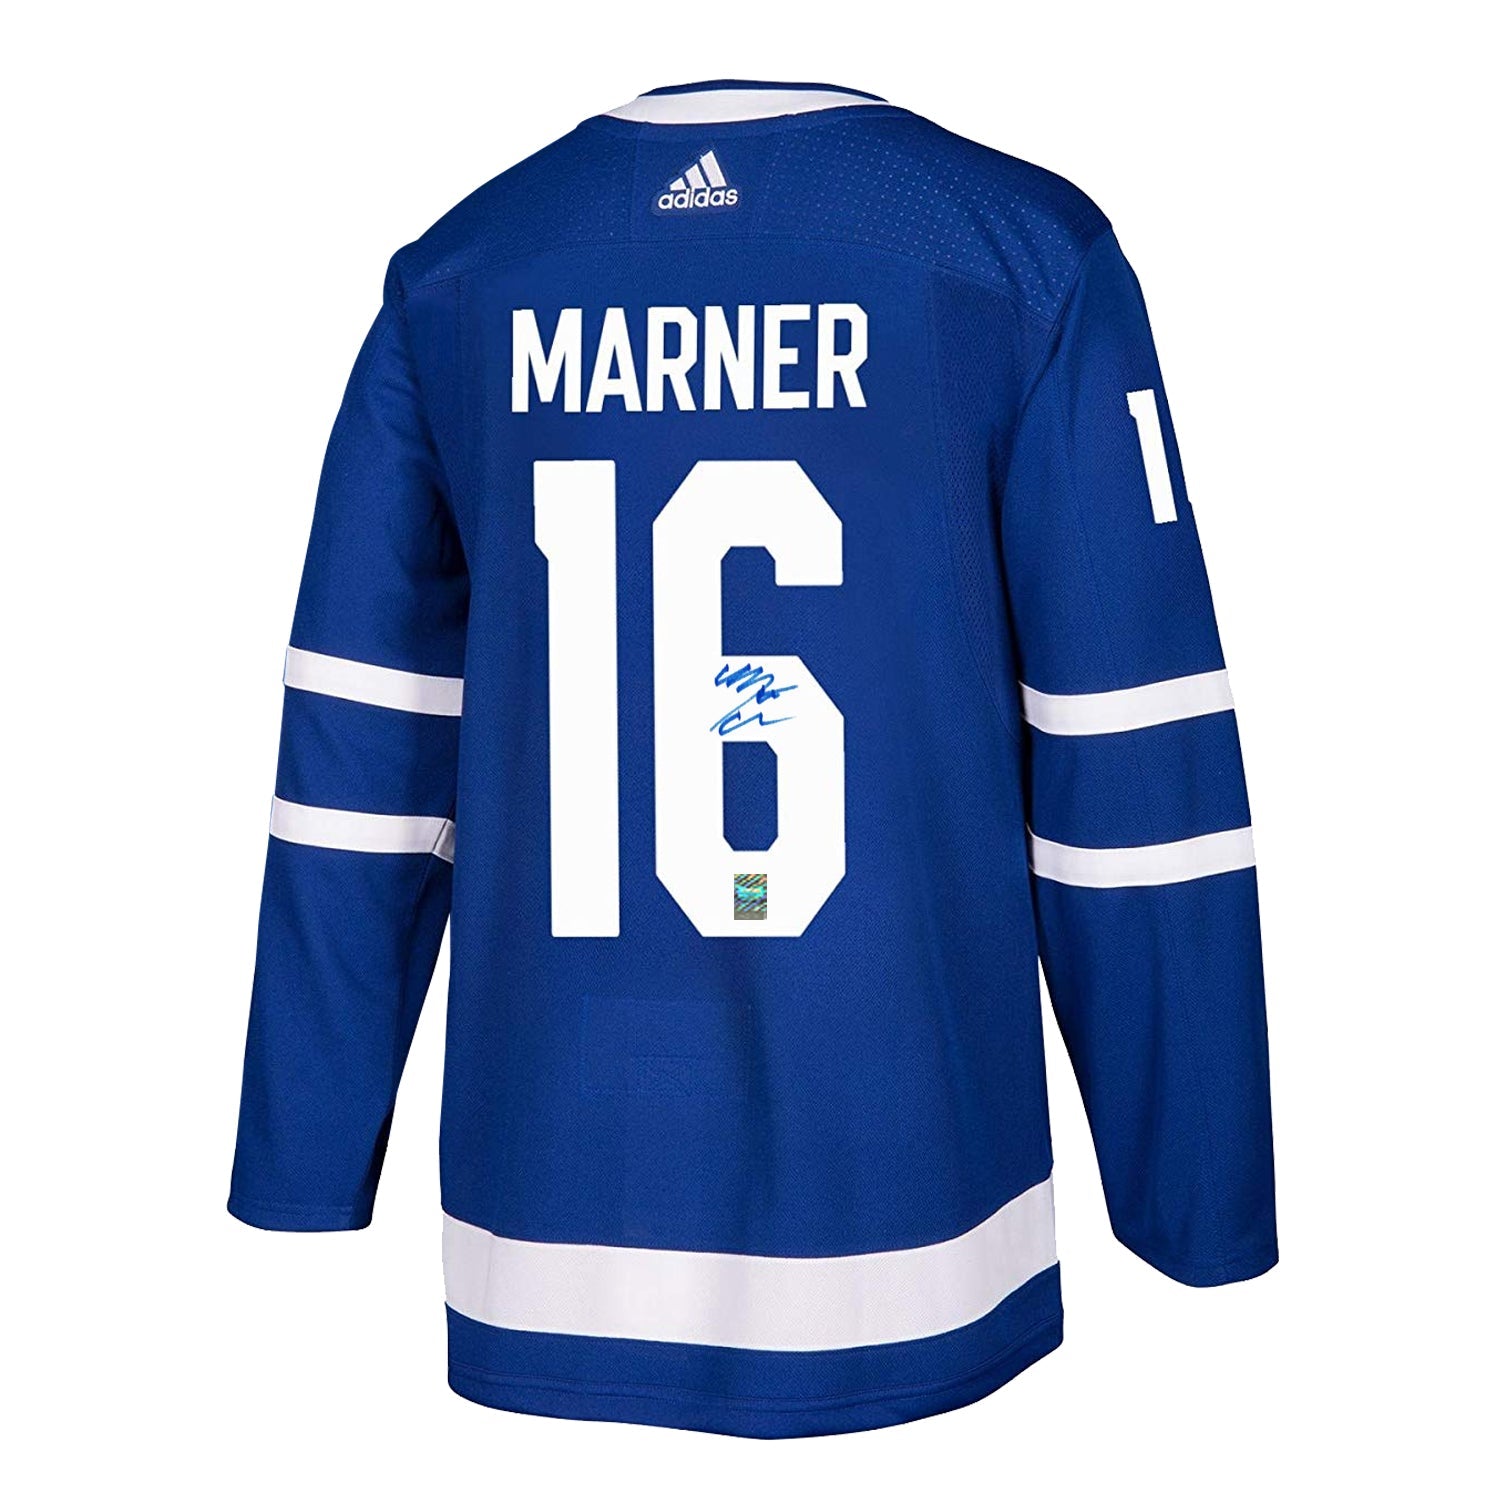 Mitch Marner Autographed Signed Toronto Maple Leafs Adidas Pro Jersey - Heritage Hockey™